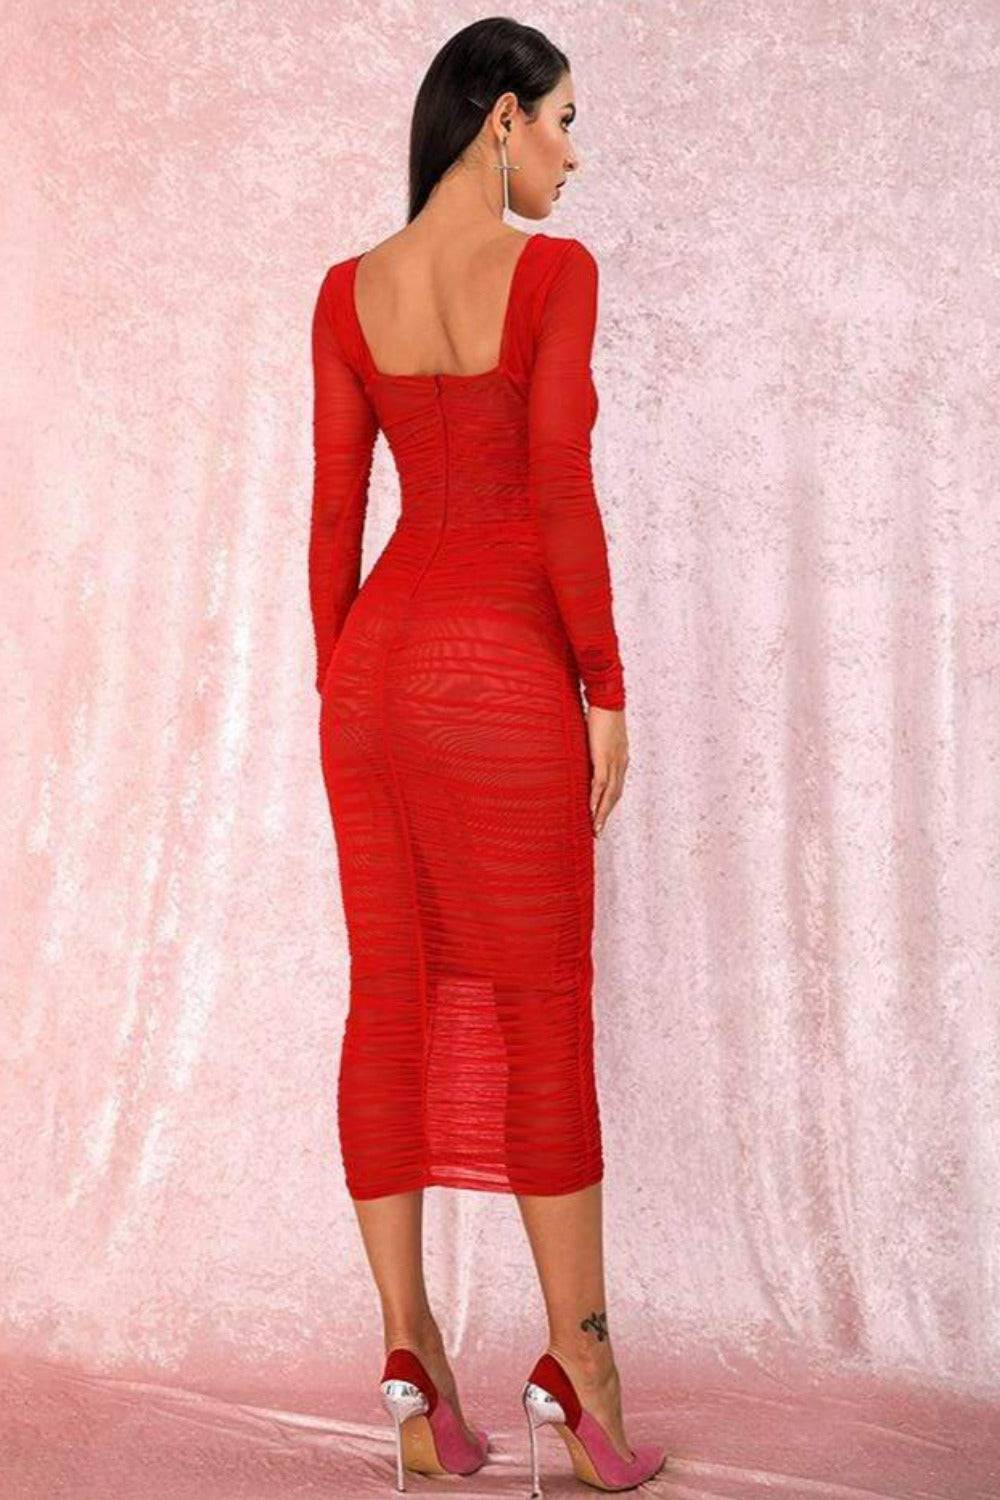 Loren Long Sleeve Elastic Ruched Hot Red Dress - TGC Boutique - Bodycon Dress